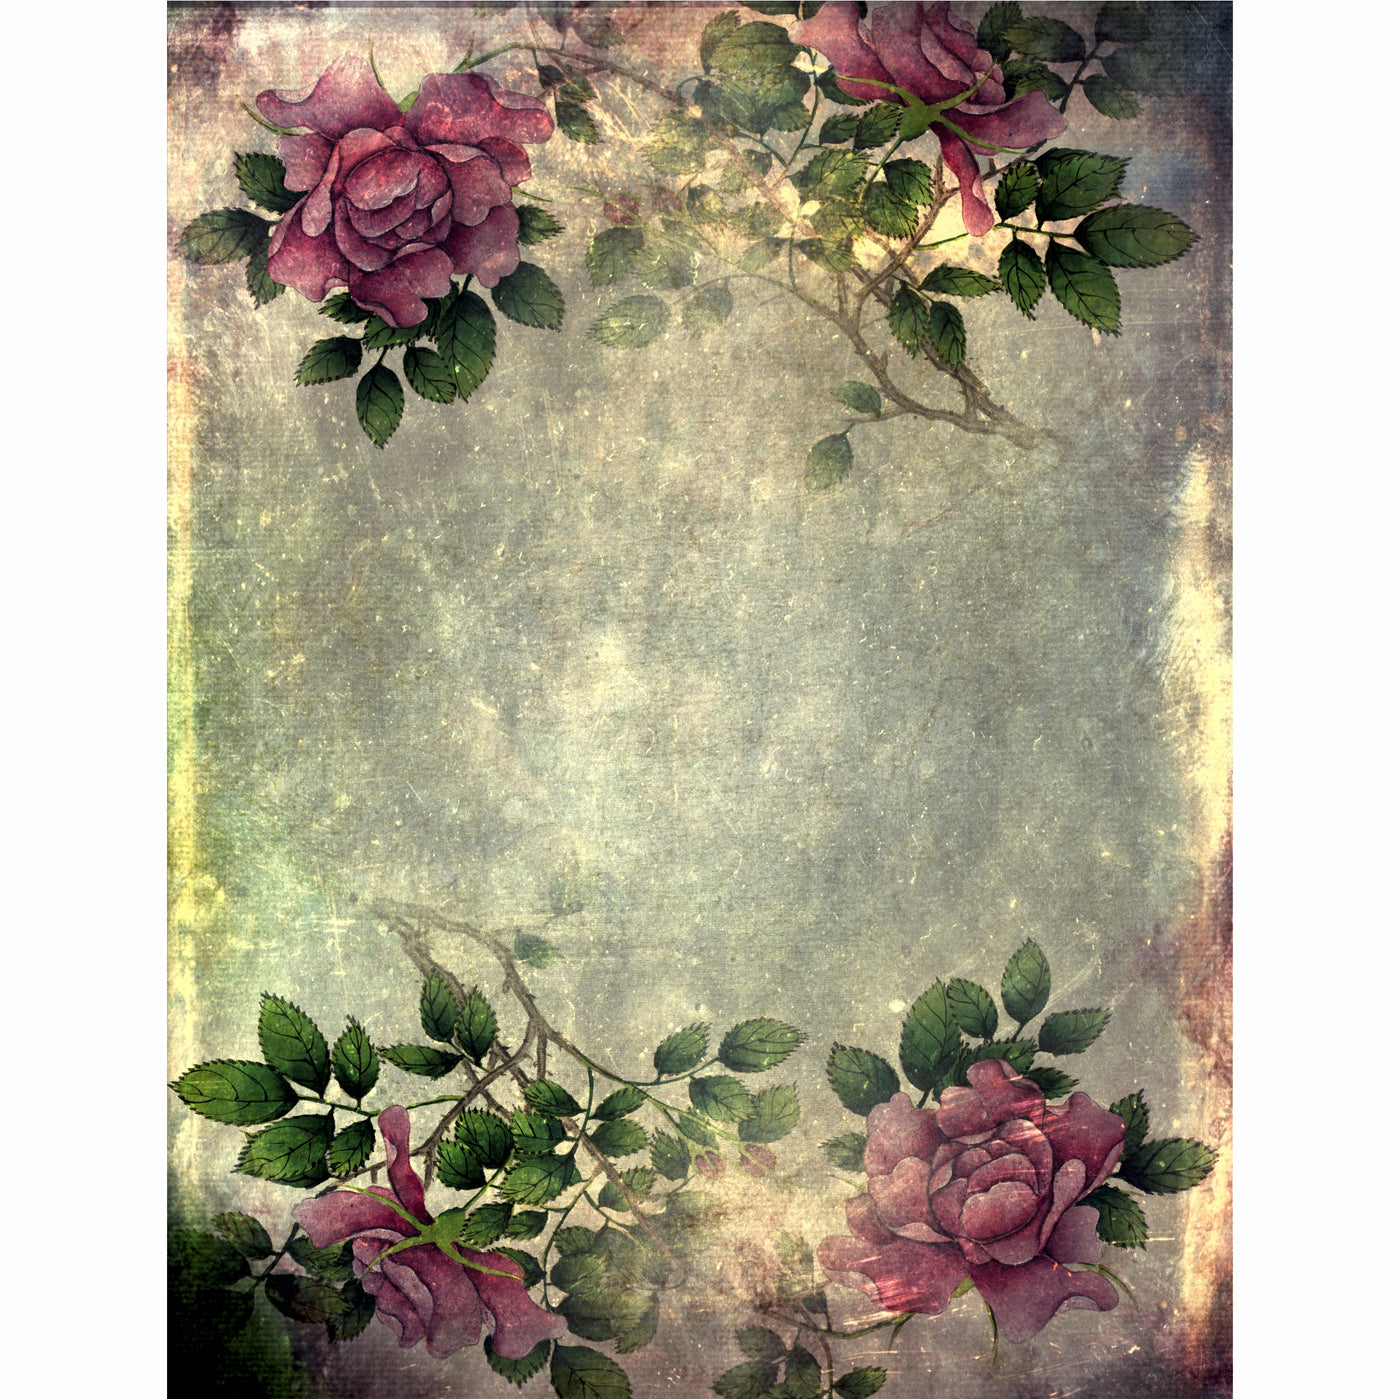 Dark Roses Rice Paper- 6 x Different Printed Mulberry Paper Images 30gsm